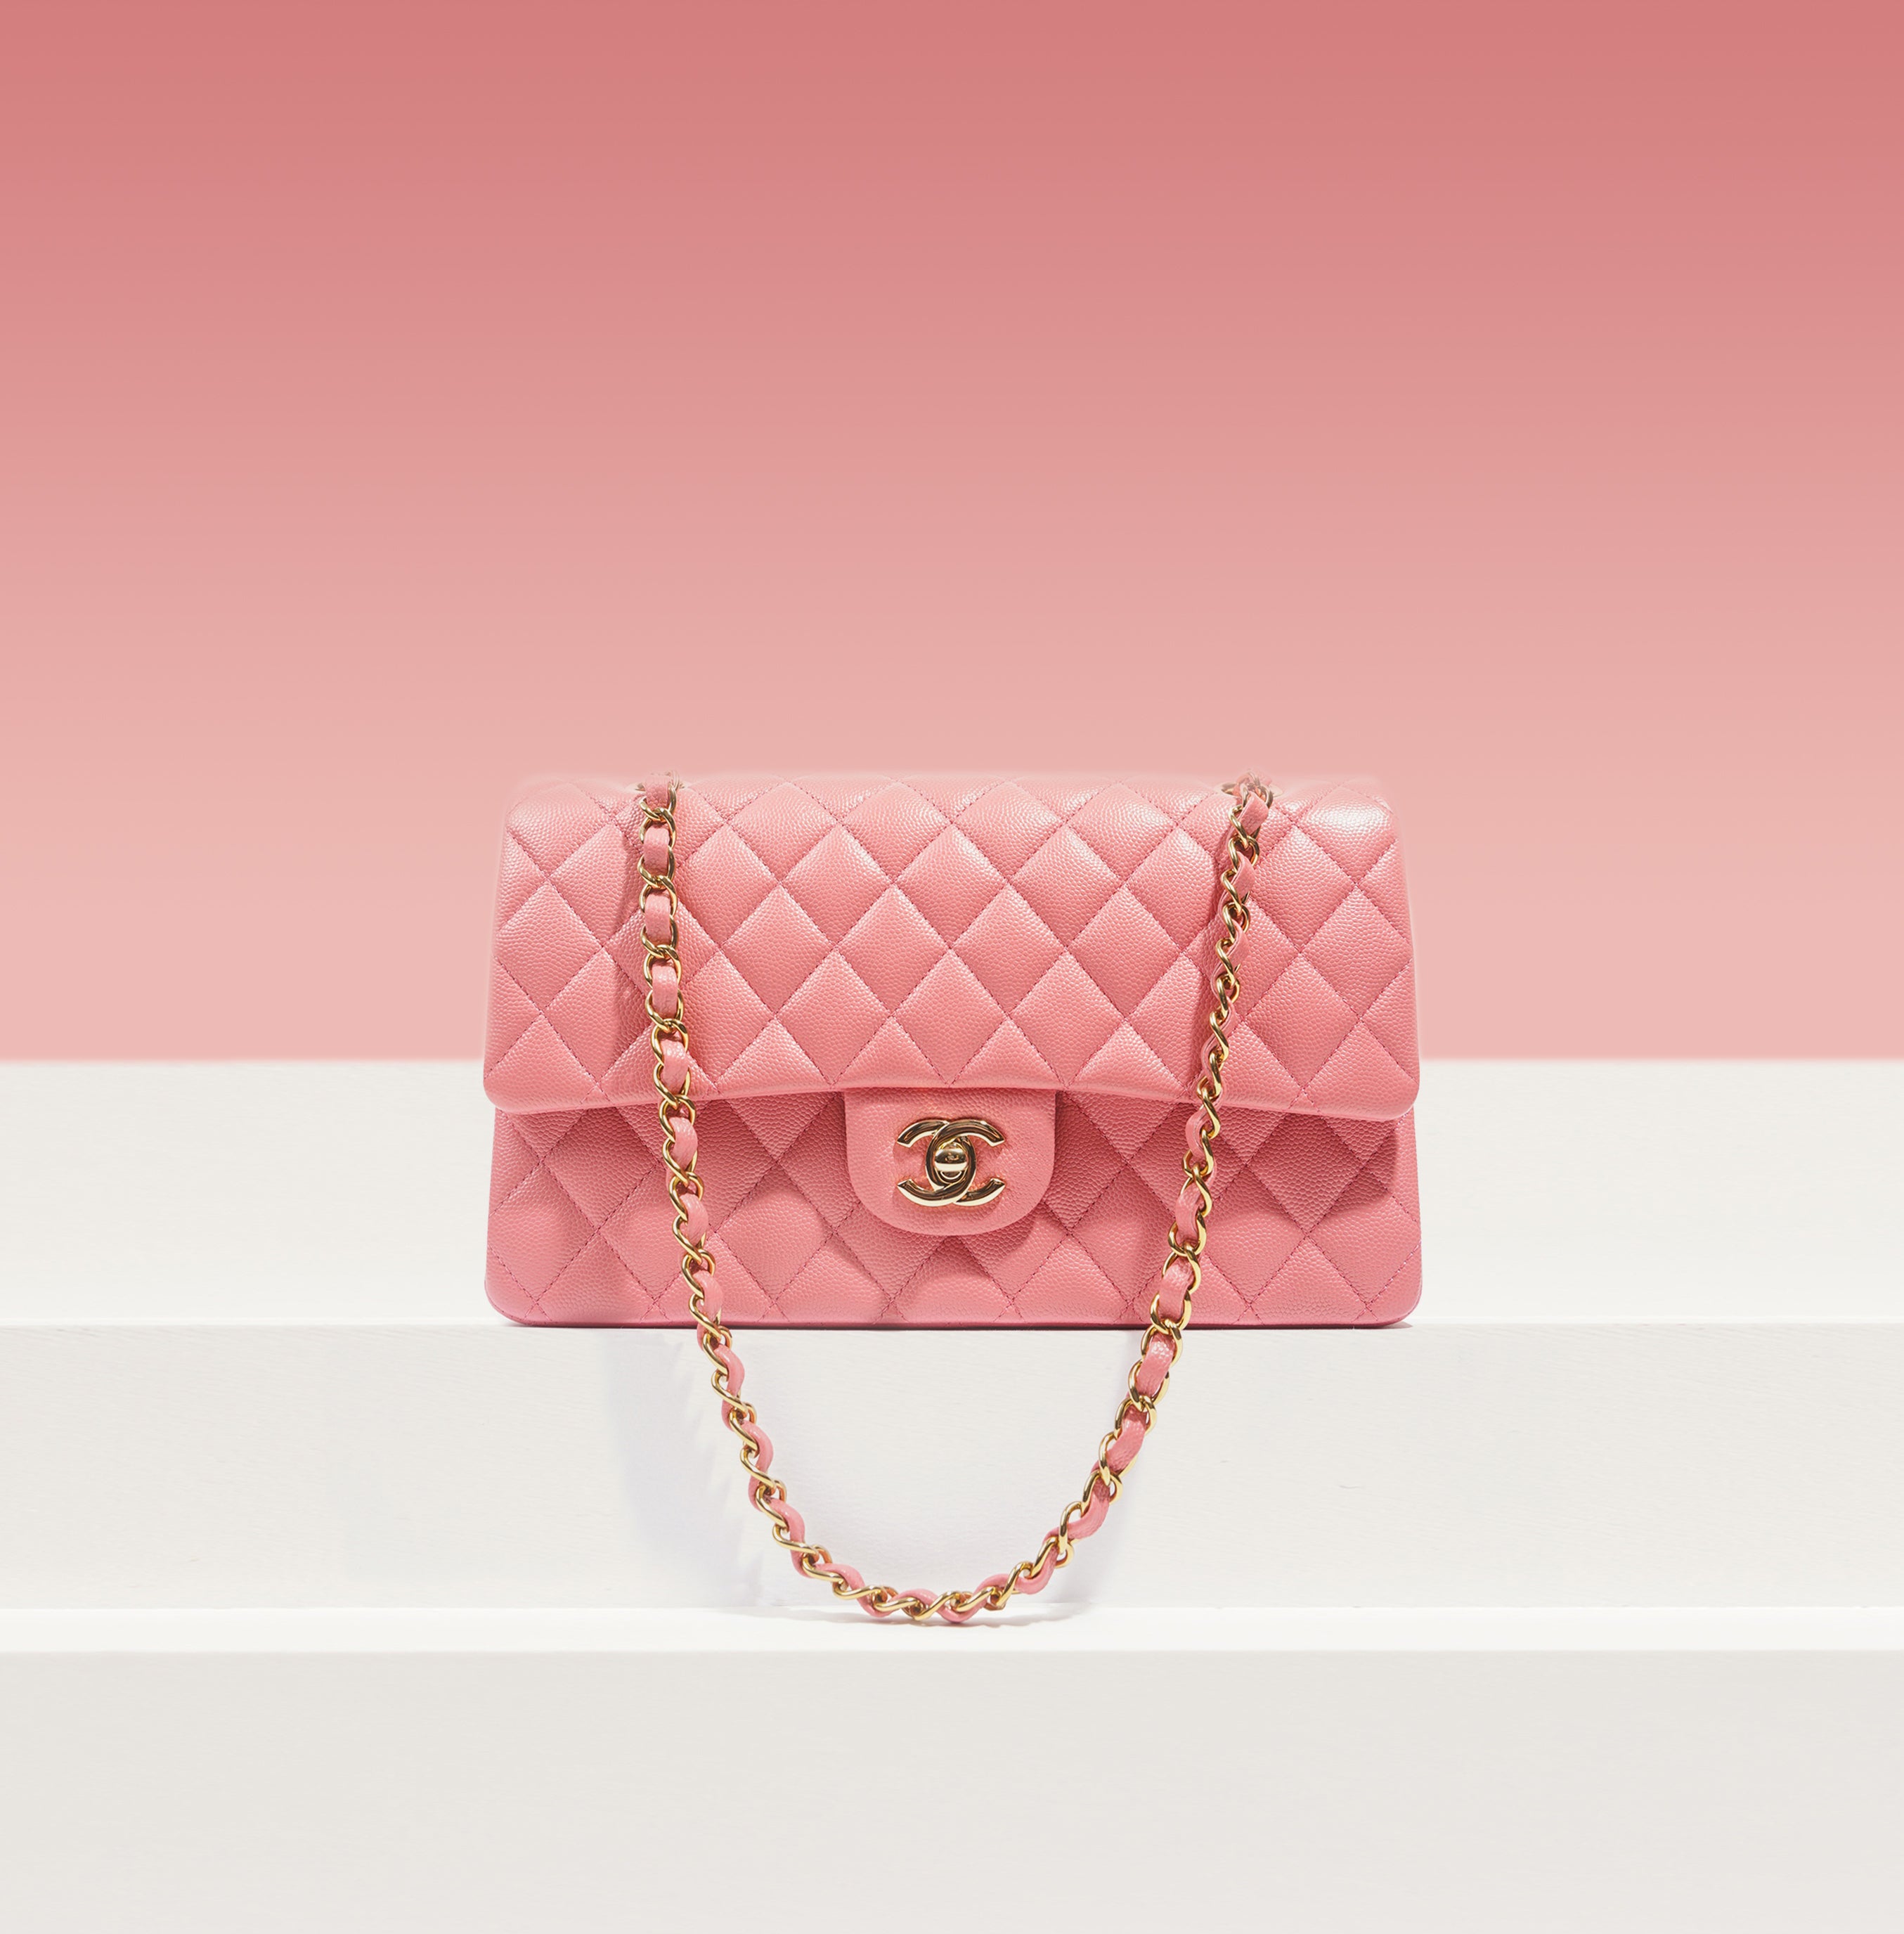 Chanel Has Not Ruled Out Increasing Prices Again This Year - PurseBop